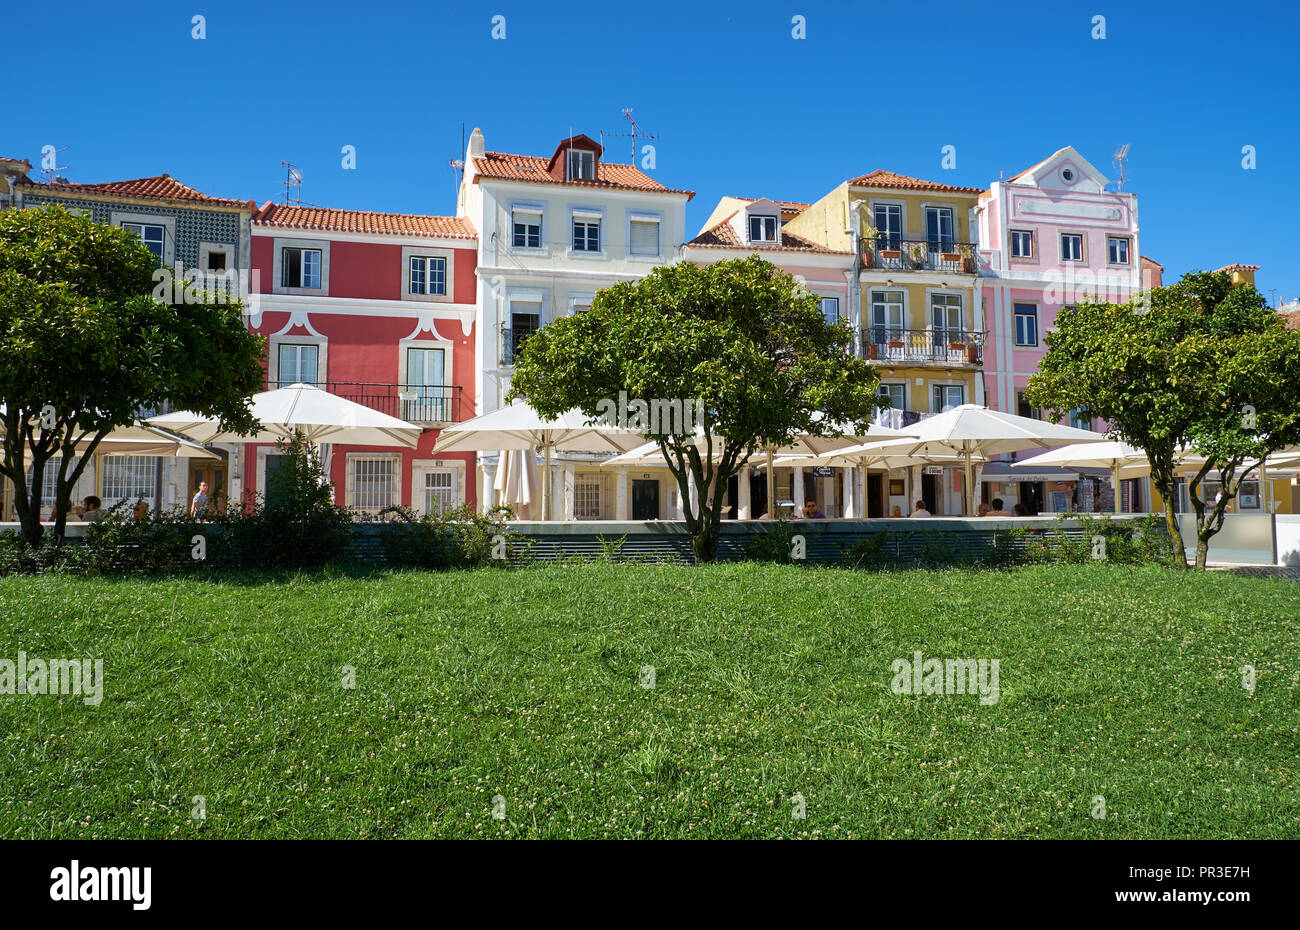 LISBON, PORTUGAL - JULY 02, 2016: The view of the street cafes on the Rua Vieira Portuense in the historical center of Belem. Lisbon. Portugal Stock Photo